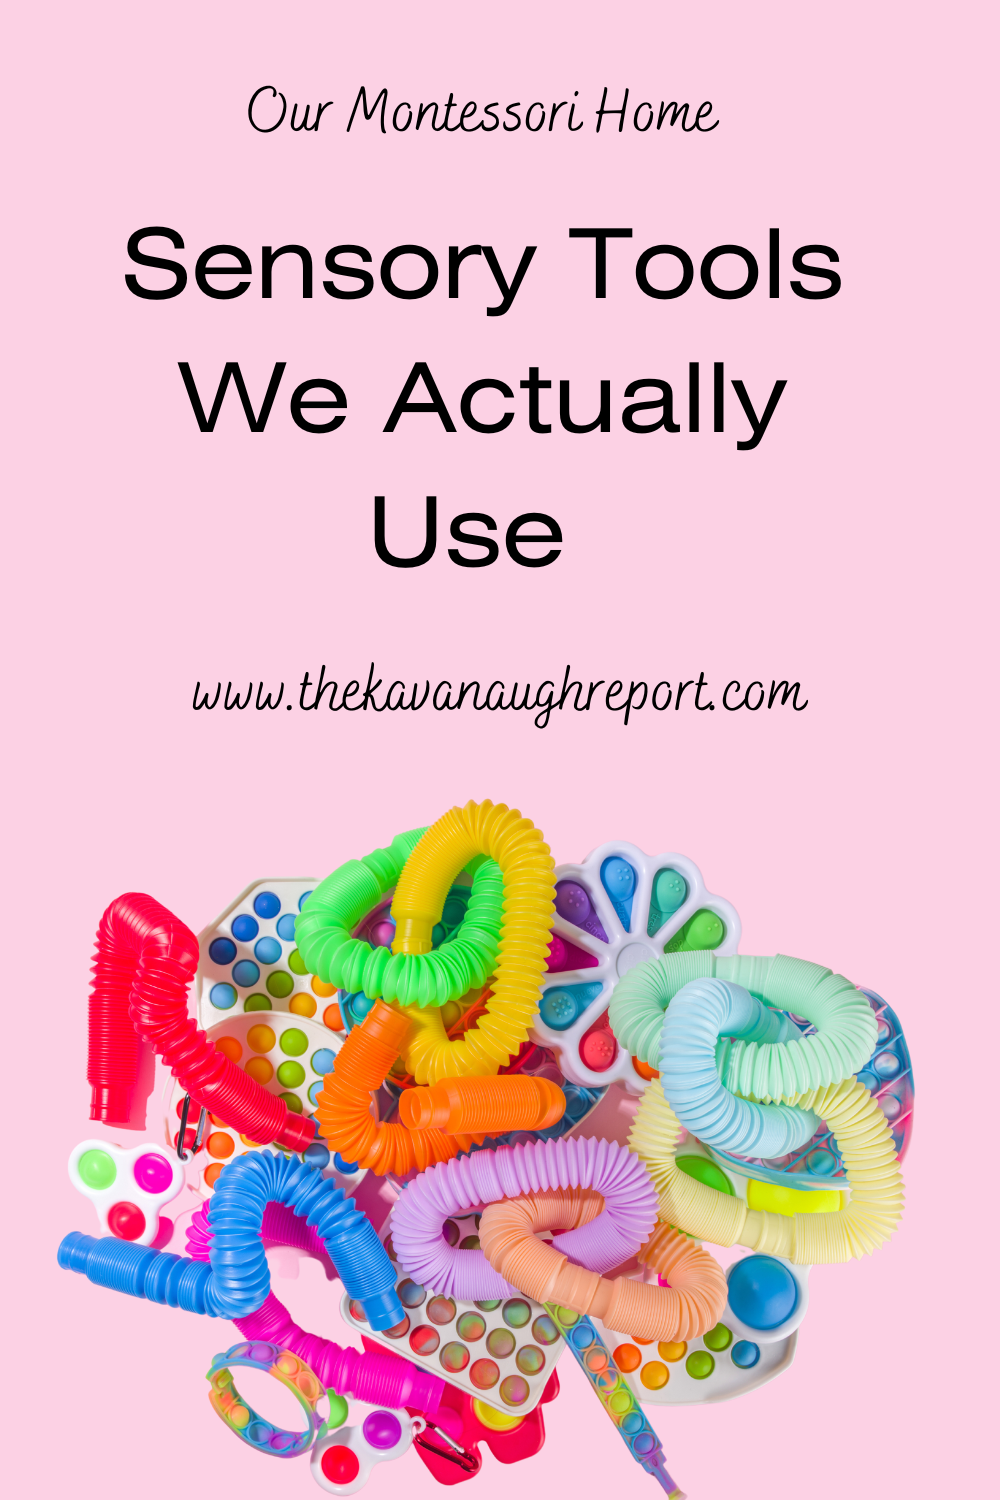 Looking to equip your Montessori home with sensory tools? We've curated a list of our absolute favorites, neatly broken down by sense. These tools are guaranteed to provide the perfect sensory balance for your children, both neurotypical and neurodivergent.